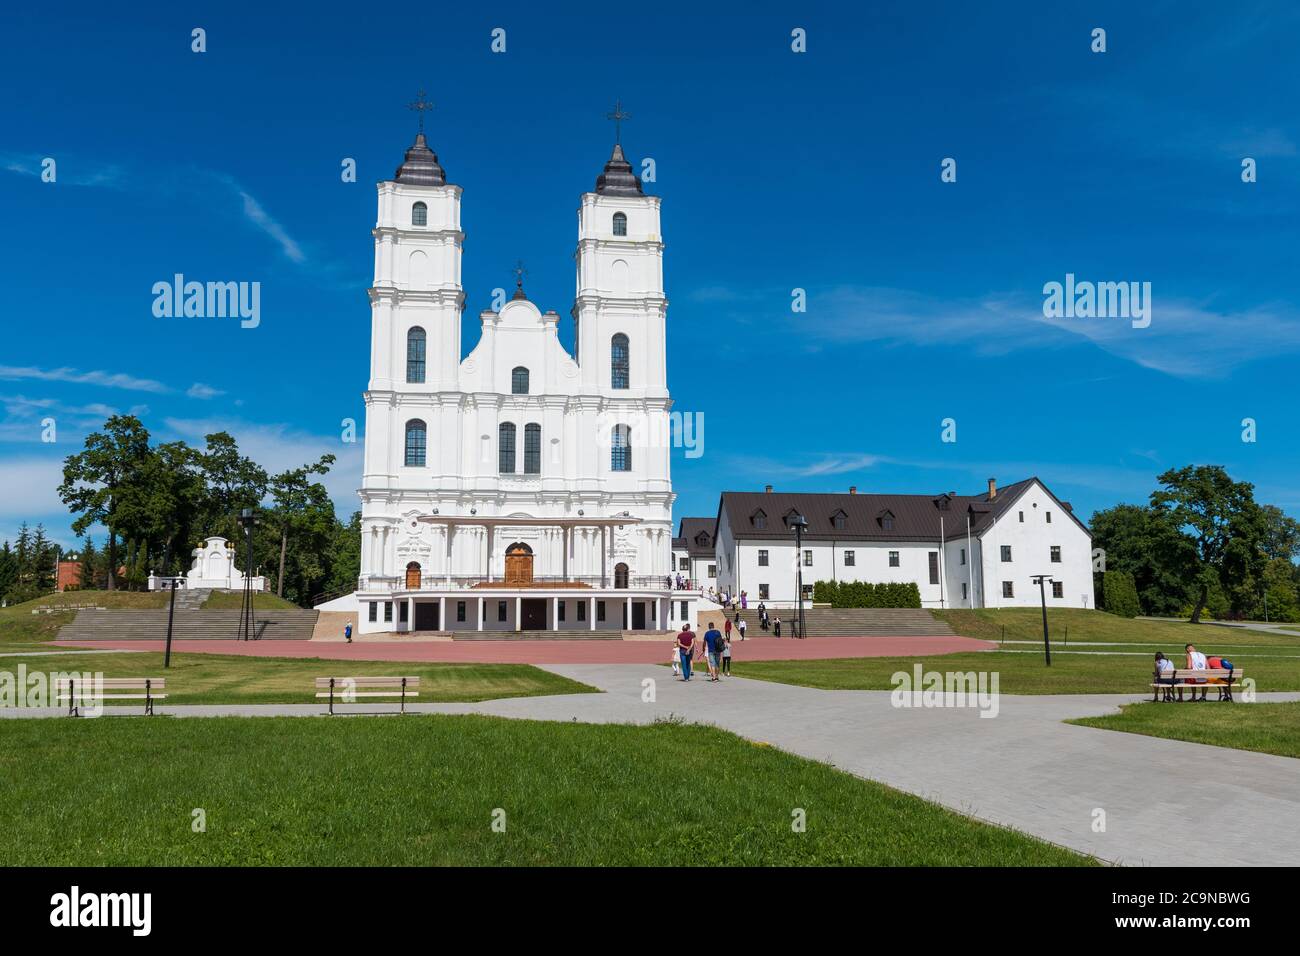 Aglona Roman Catholic Basilica of the Assumption of the Blessed Virgin Mary in Aglona is one of the most important Catholic spiritual centers, Latvia Stock Photo